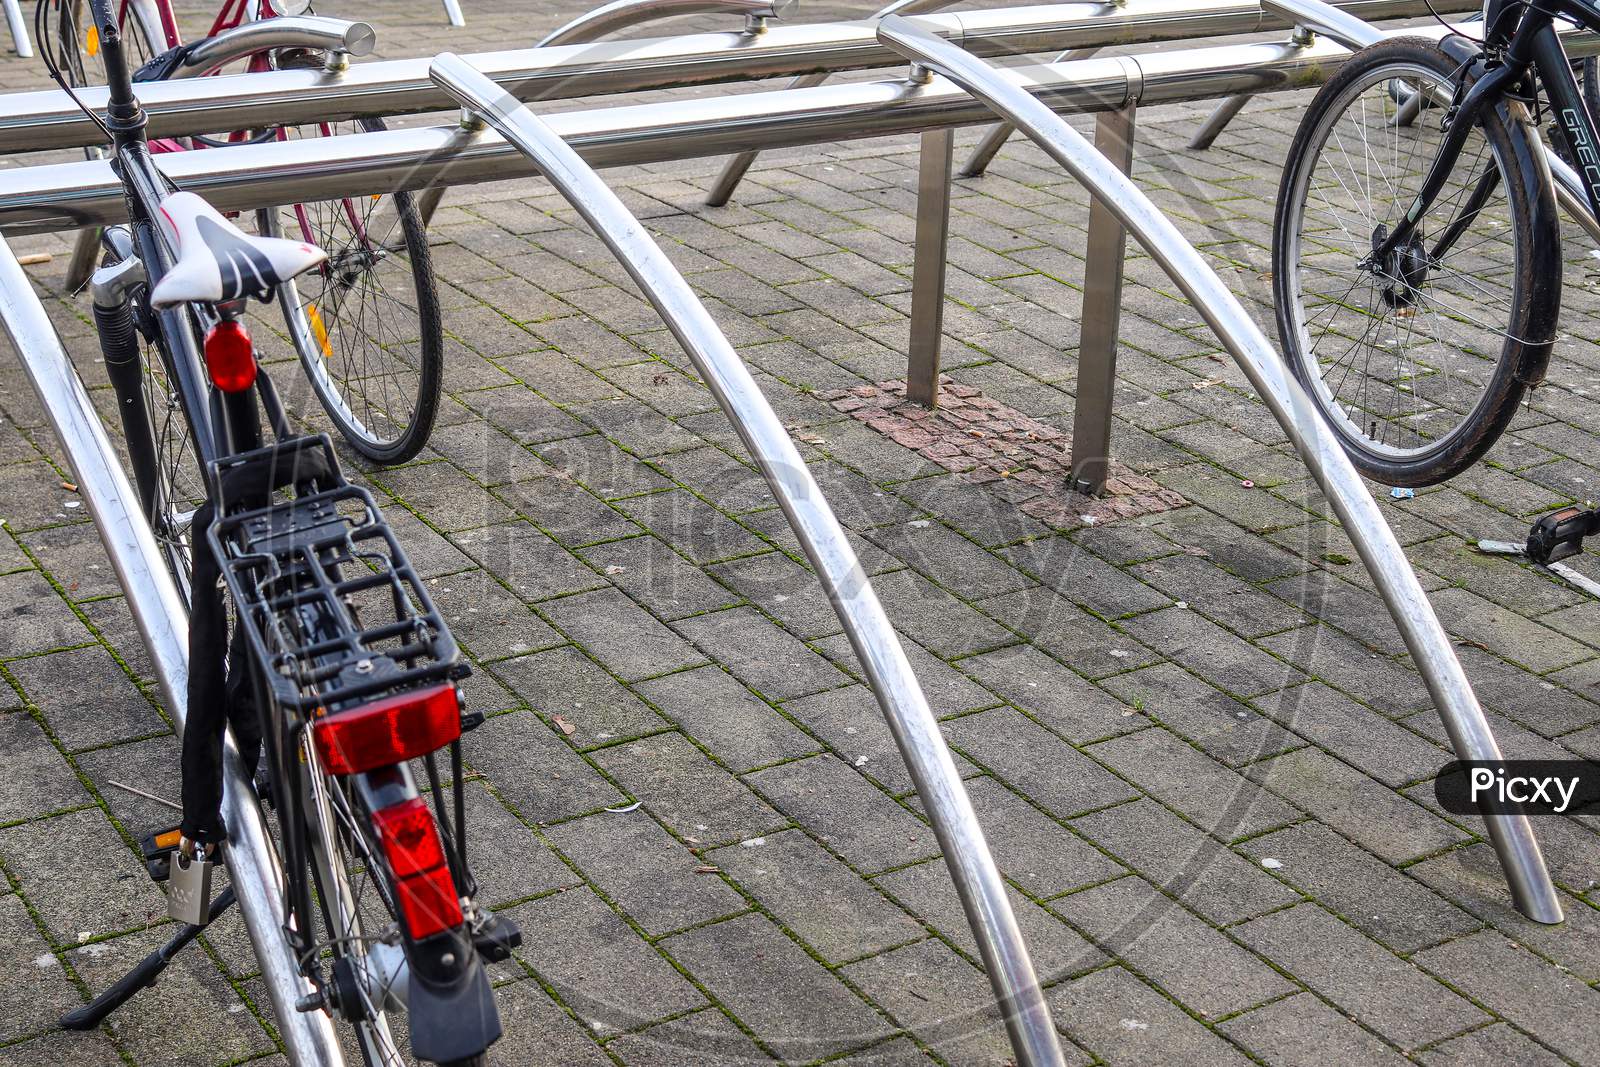 Schleswig-Holstein, Germany - May 02, 2020: Bicycles at a parking space